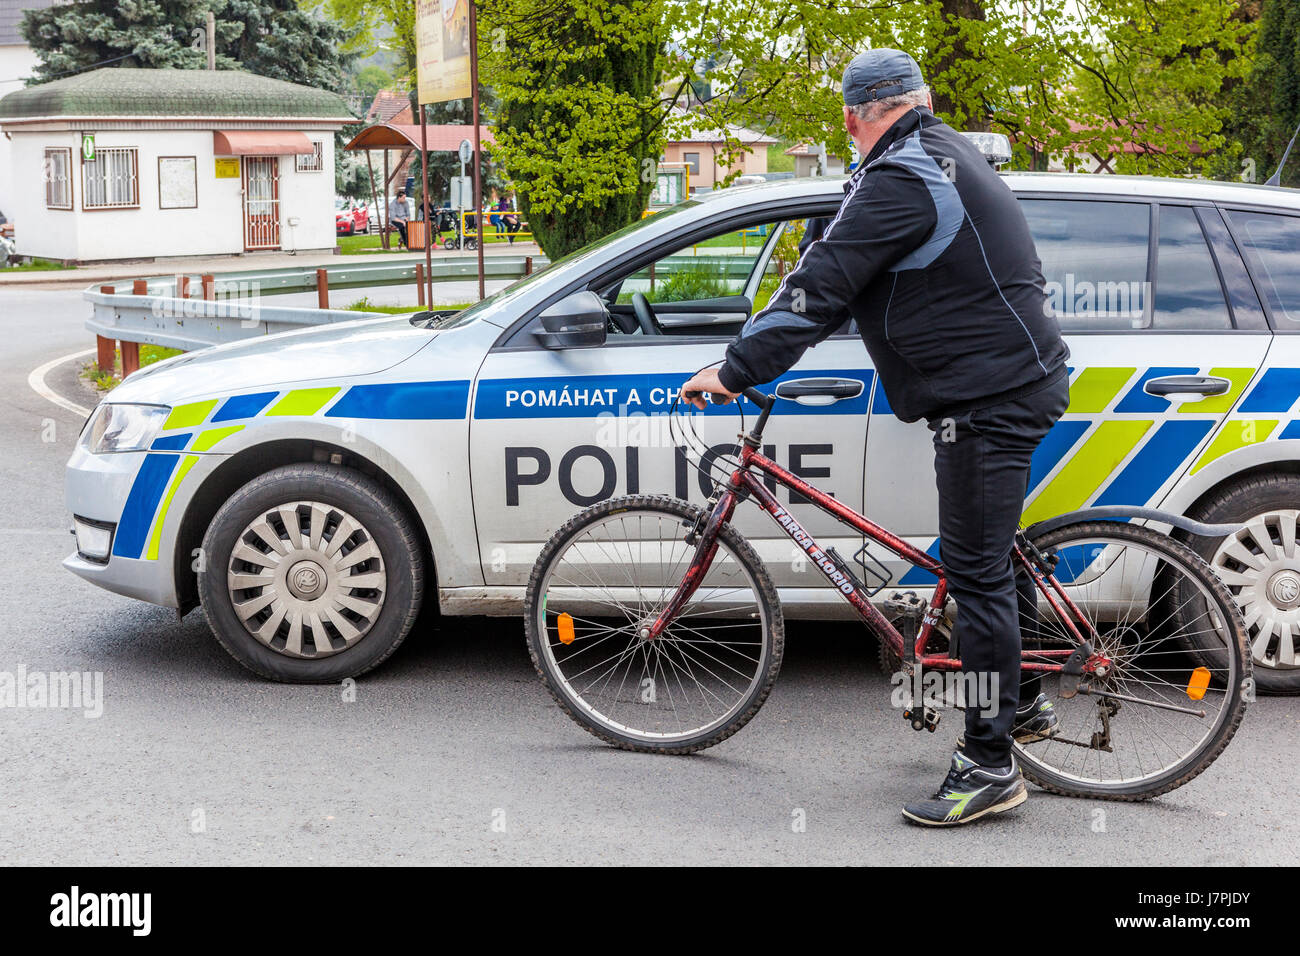 Cyclist on a bicycle stopped at a police car, Czech Republic everyday life Europe Stock Photo